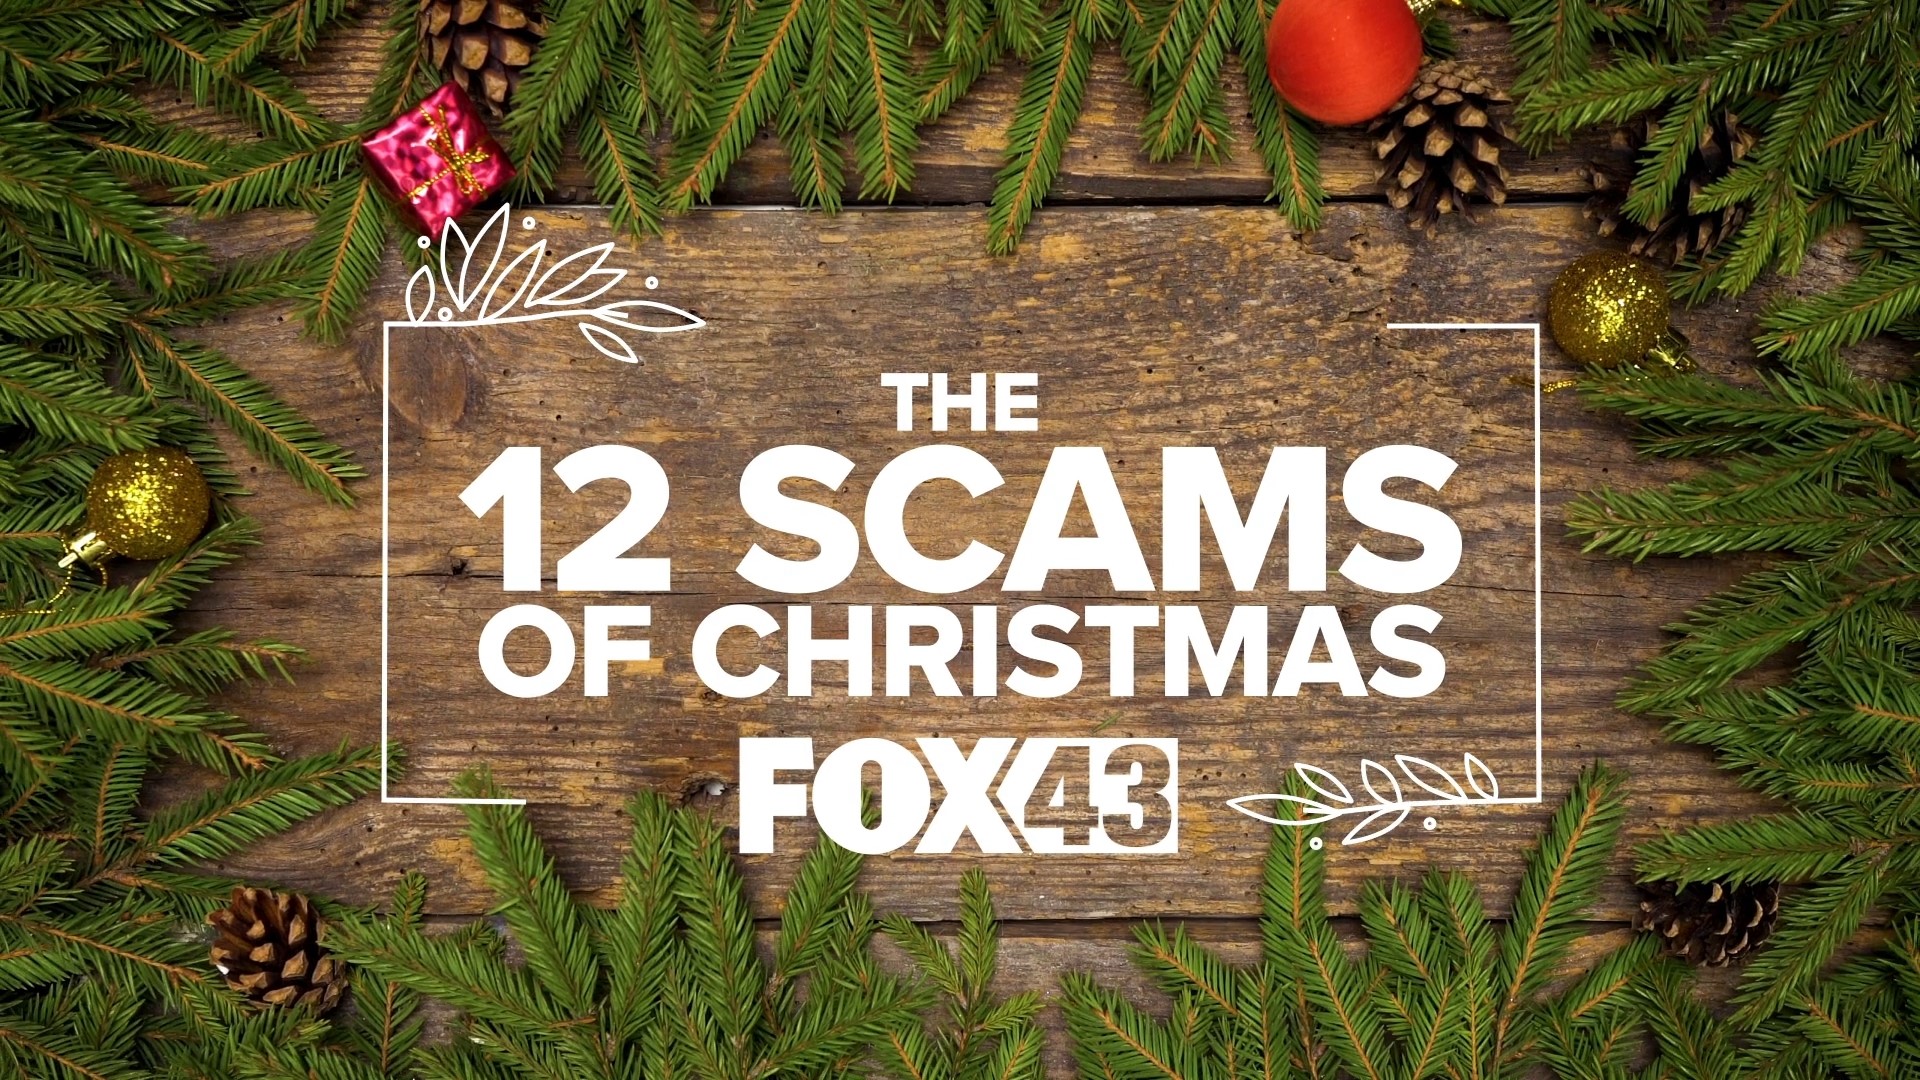 The secret sister gift exchange made the list of 12 scams of Christmas.